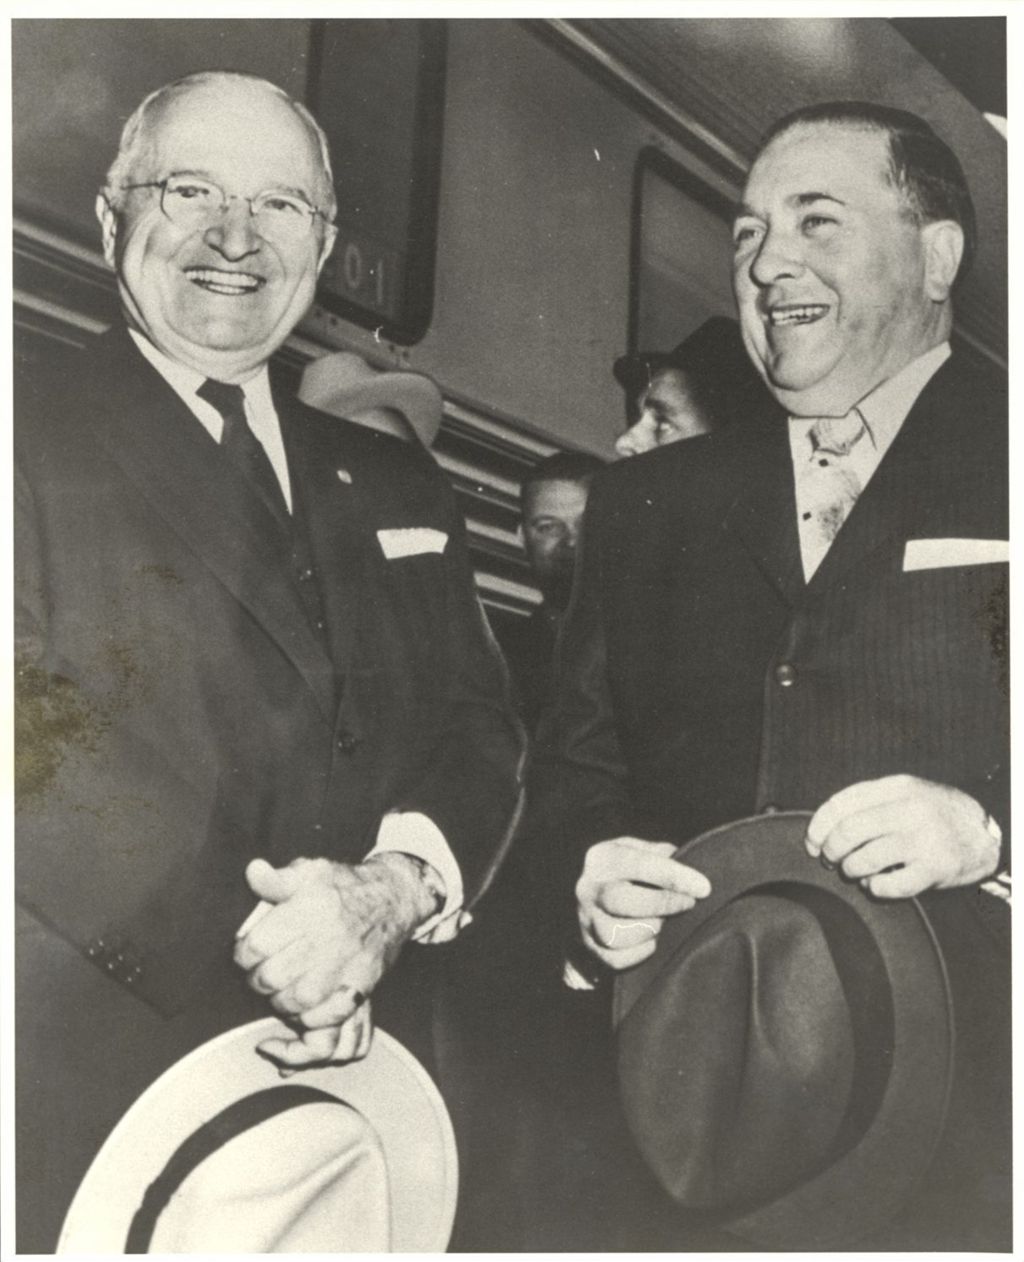 Miniature of Harry S. Truman and Richard J. Daley standing together, smiling